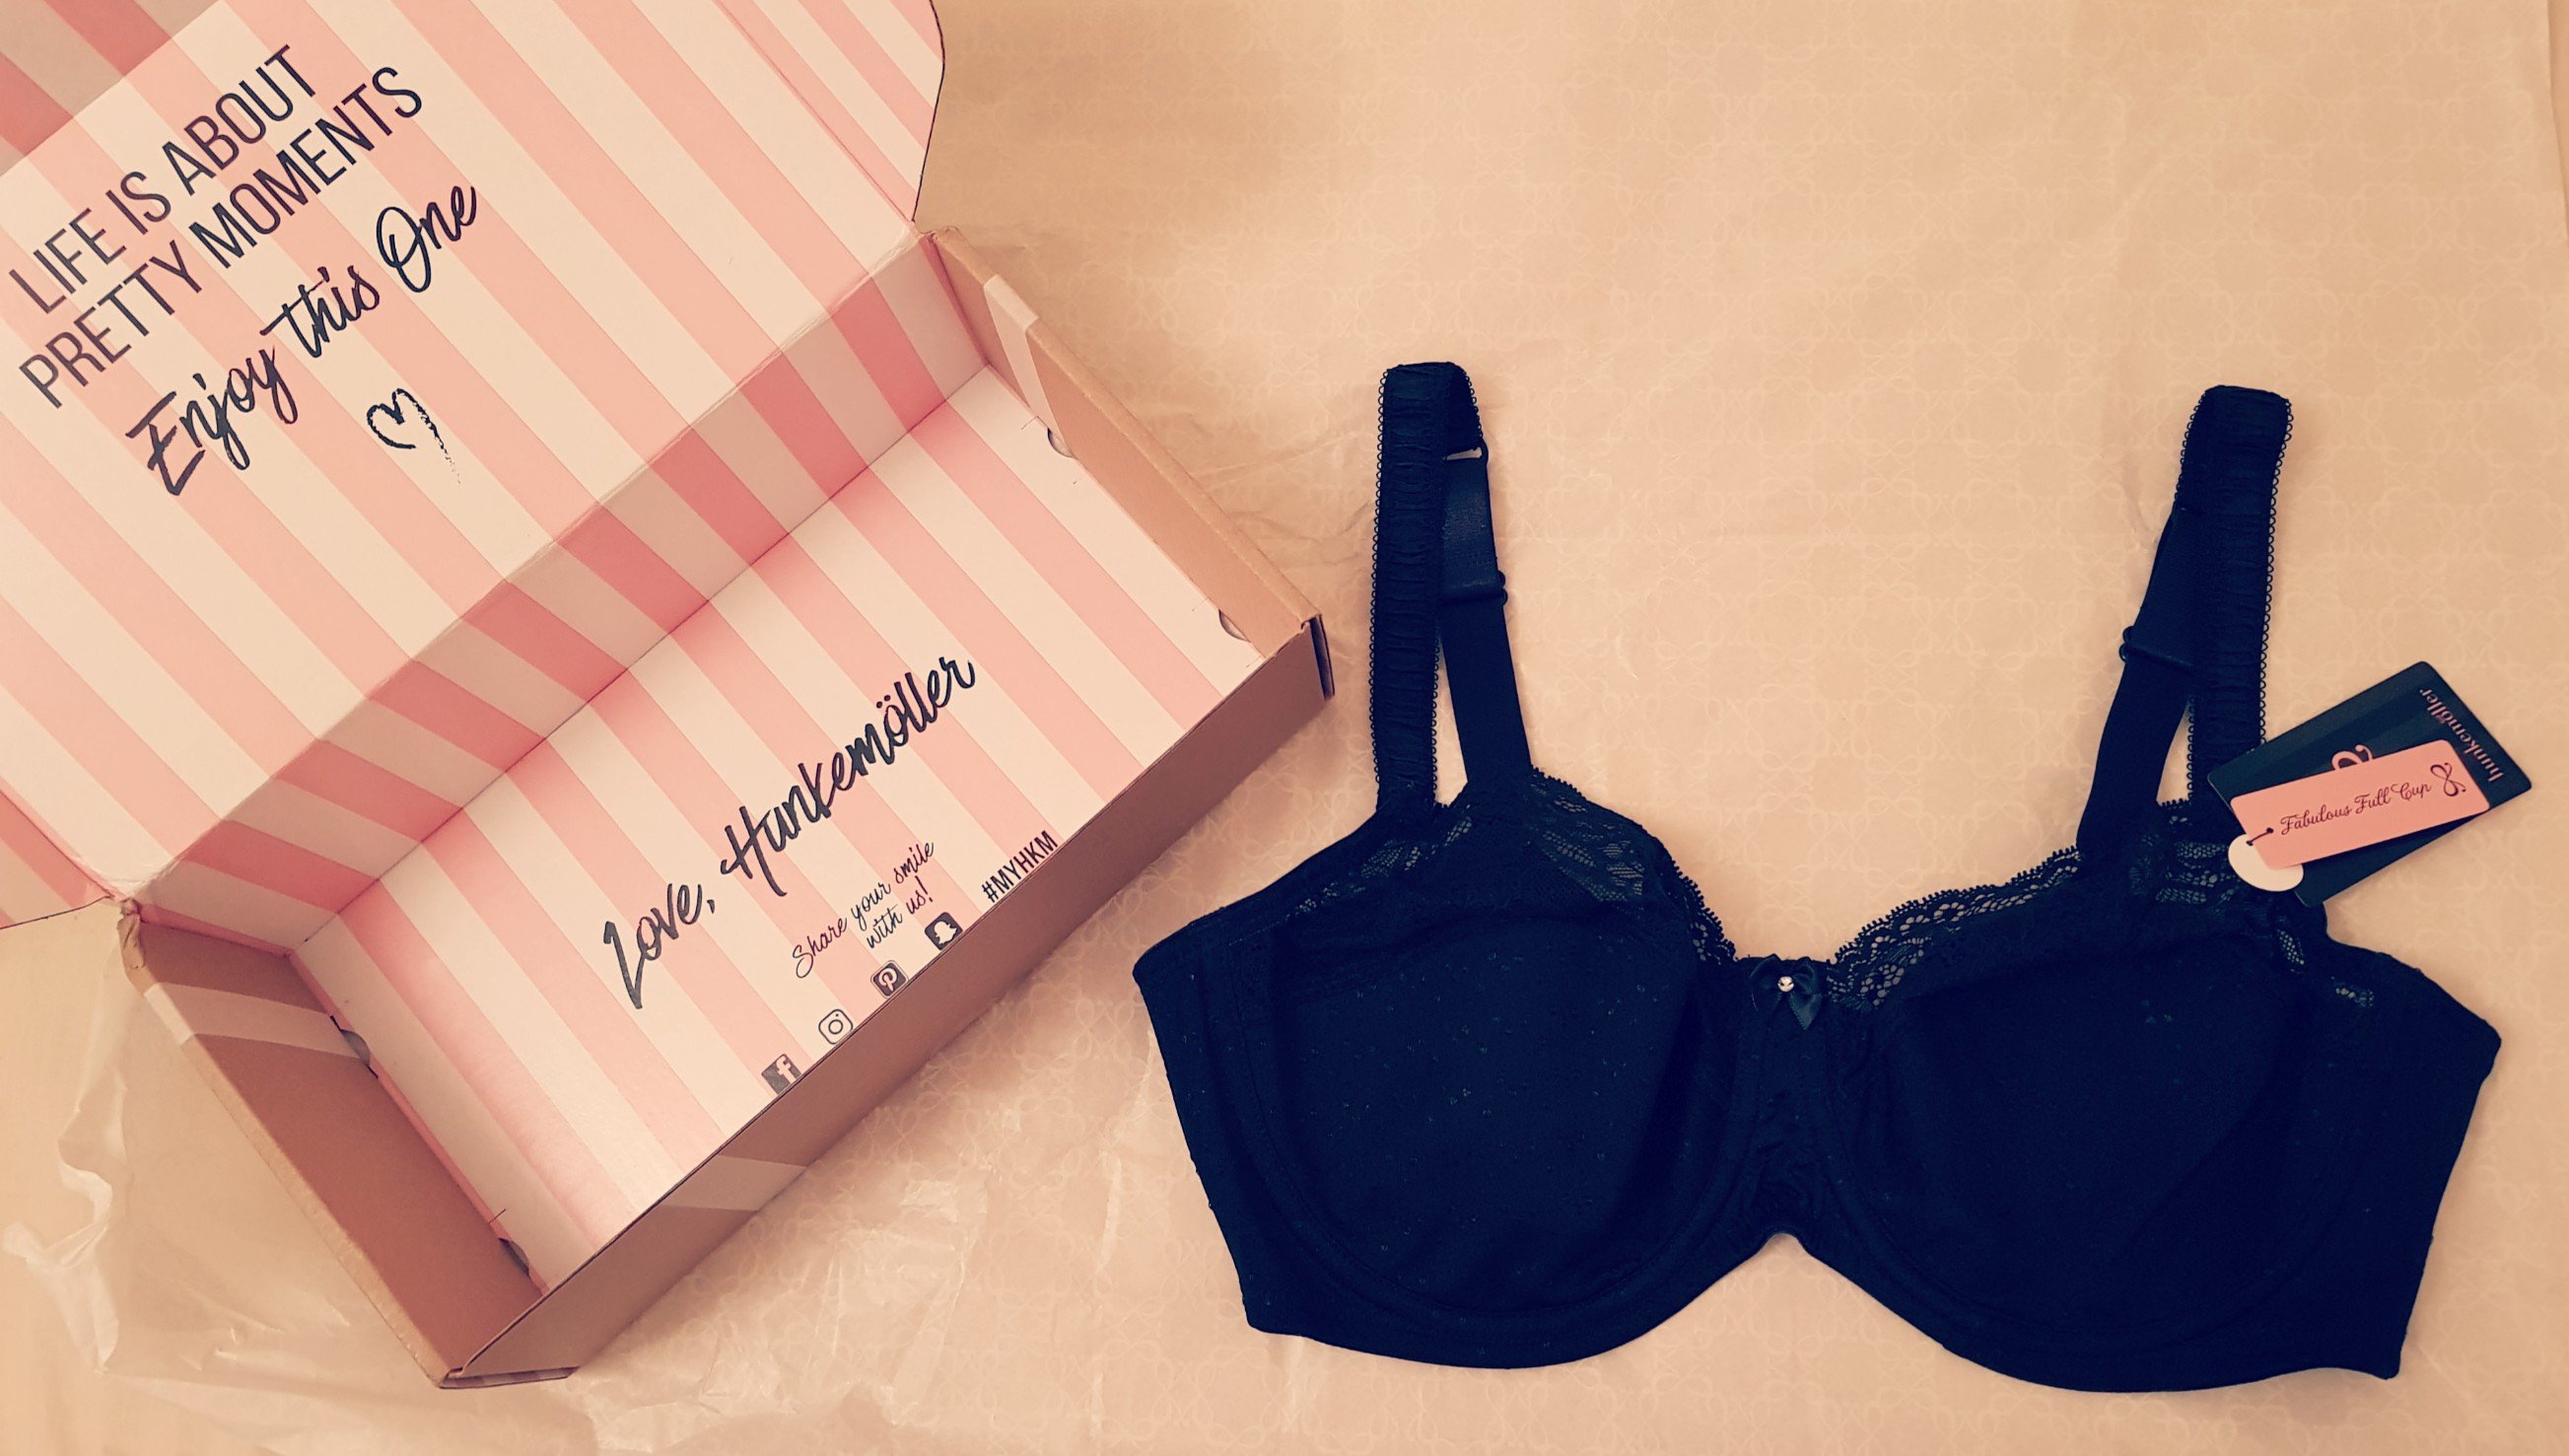 Hunkemoller underwired non padded black bra flatlay. Pretty box next to it says life is about pretty moments, enjoy this one. Love, hunkemoller 